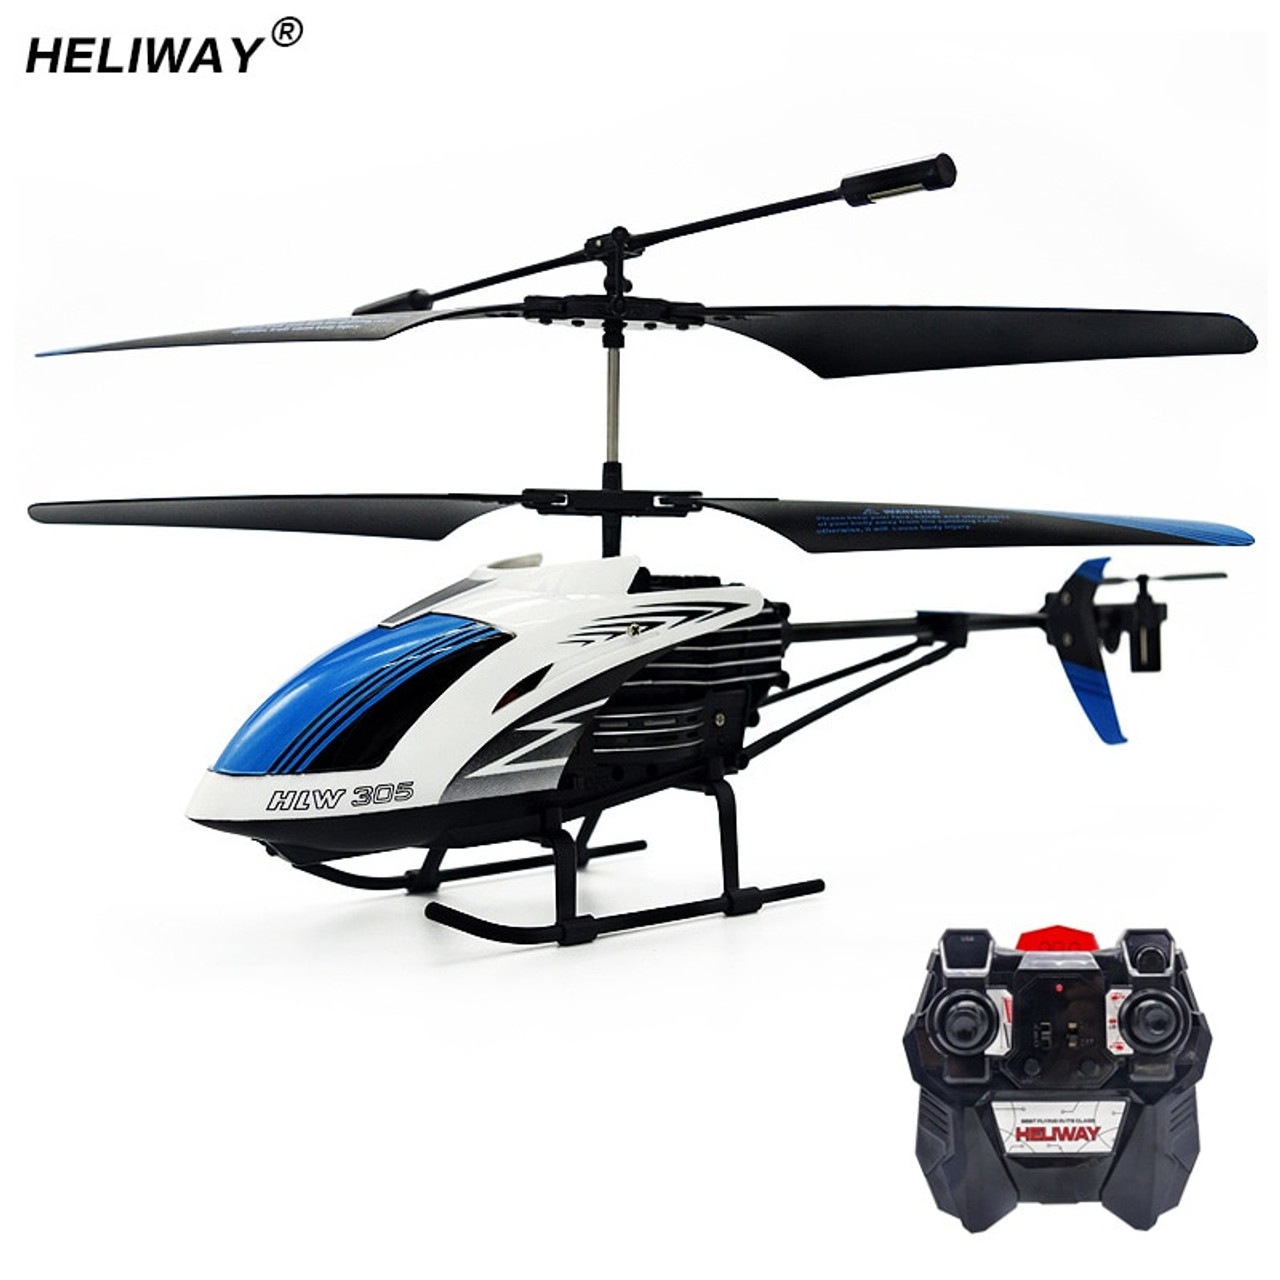 rc helicopter toy